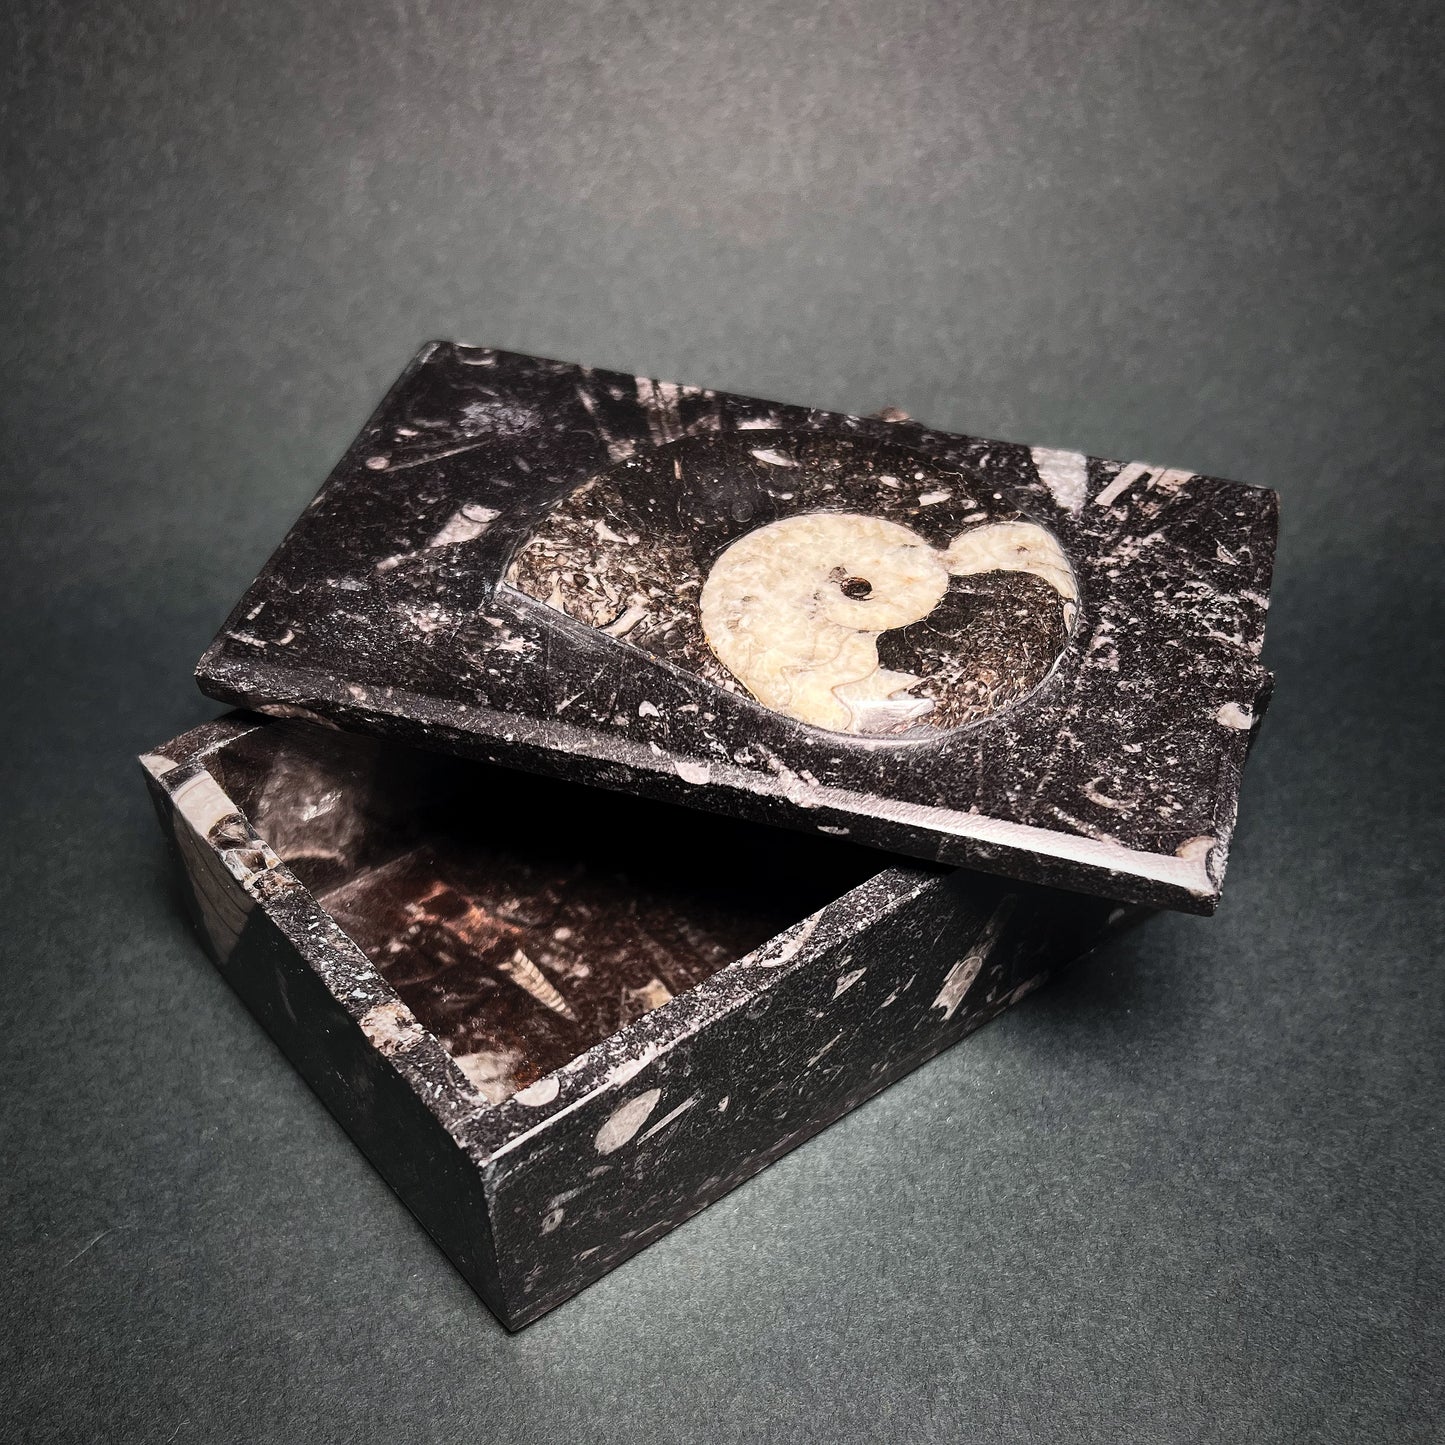 A stone box made of dark marble contain gin fossils.